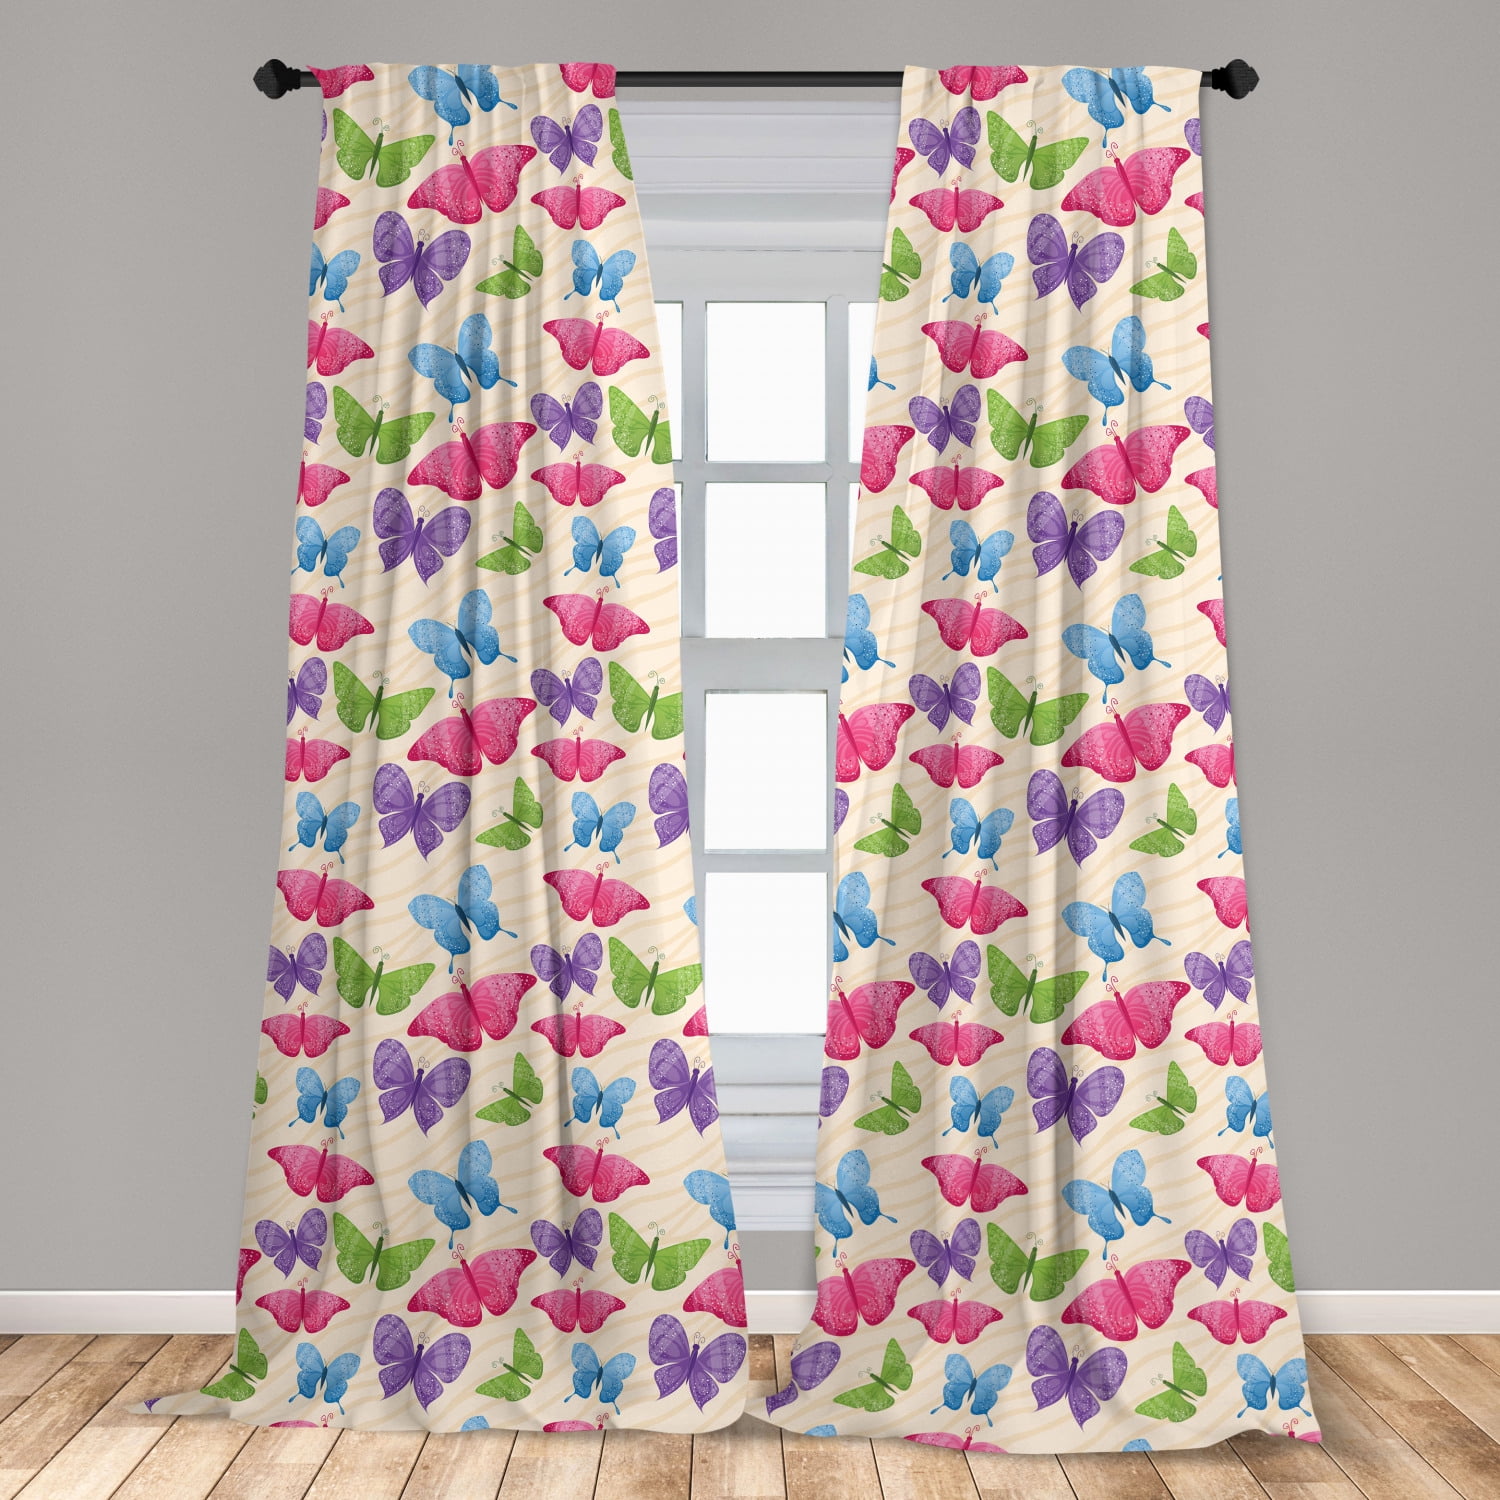 Butterfly Print Window Curtains Thermal Ready Fashion Curtain Home Bedroom Decor 